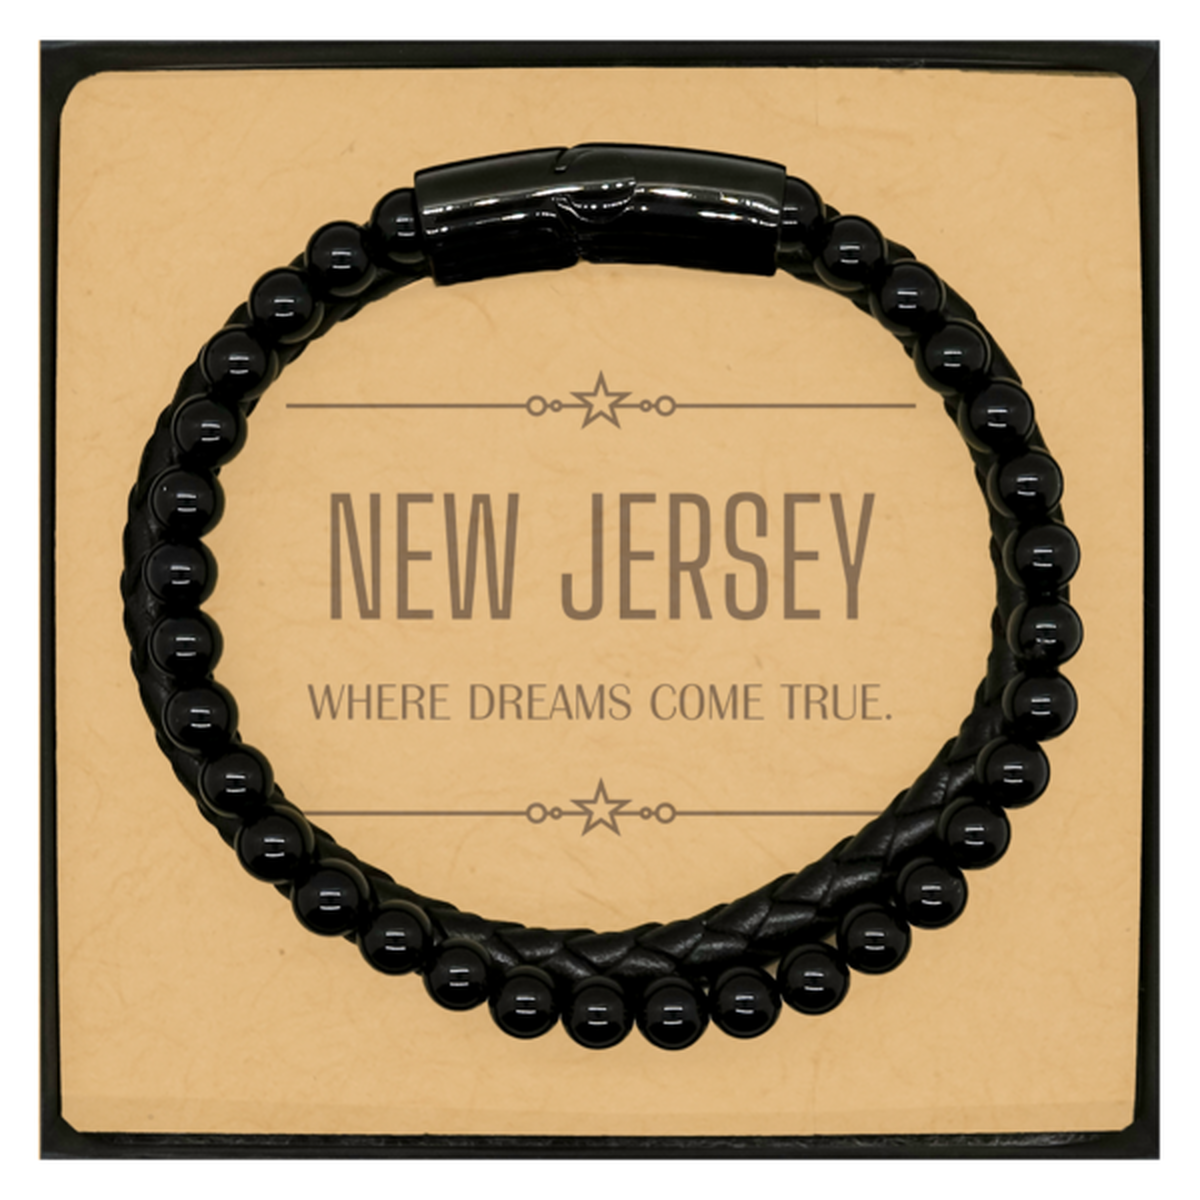 Love New Jersey State Stone Leather Bracelets, New Jersey Where dreams come true, Birthday Christmas Inspirational Gifts For New Jersey Men, Women, Friends